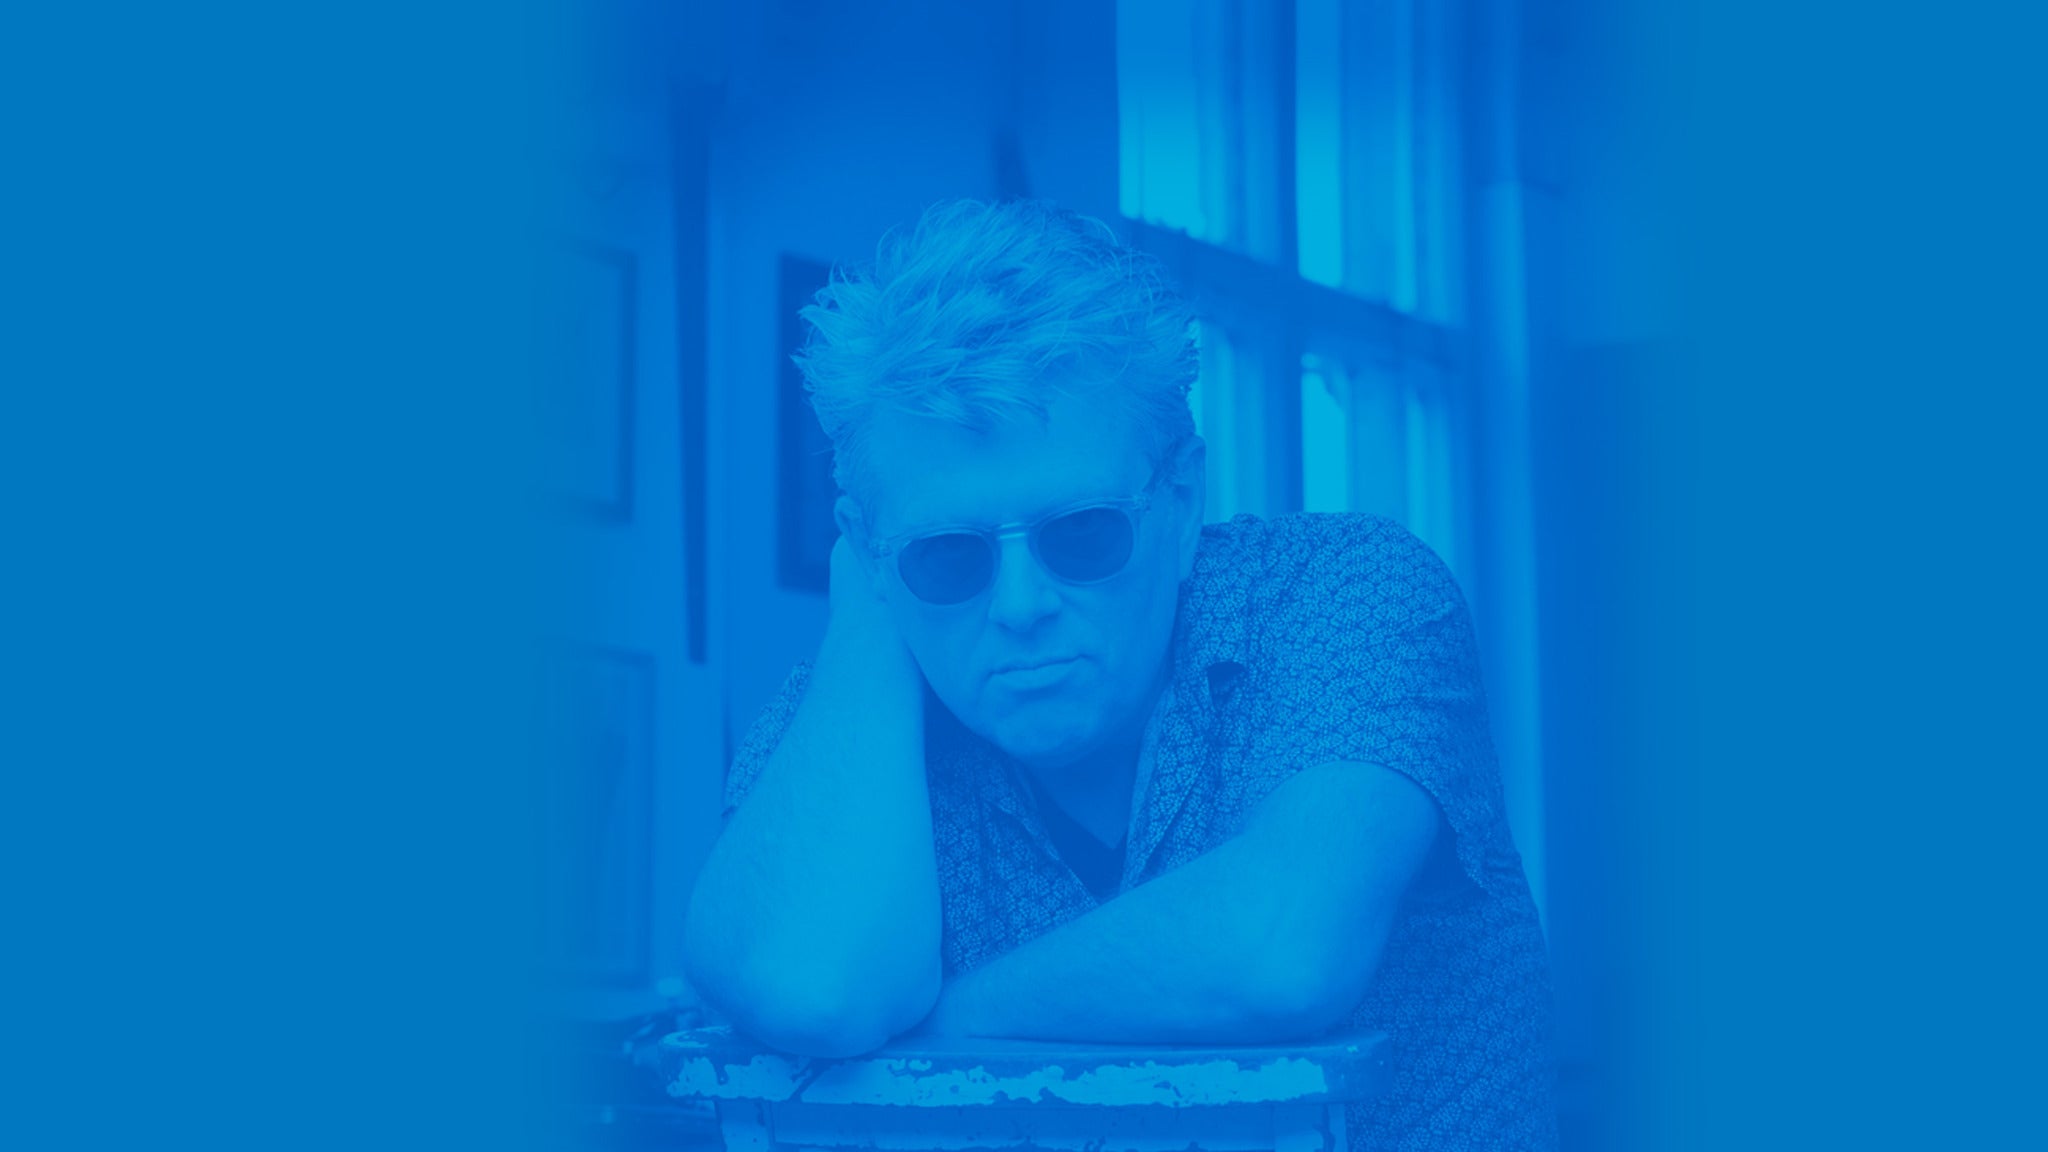 Image used with permission from Ticketmaster | Thompson Twins Tom Bailey into The Gap Australian Tour tickets